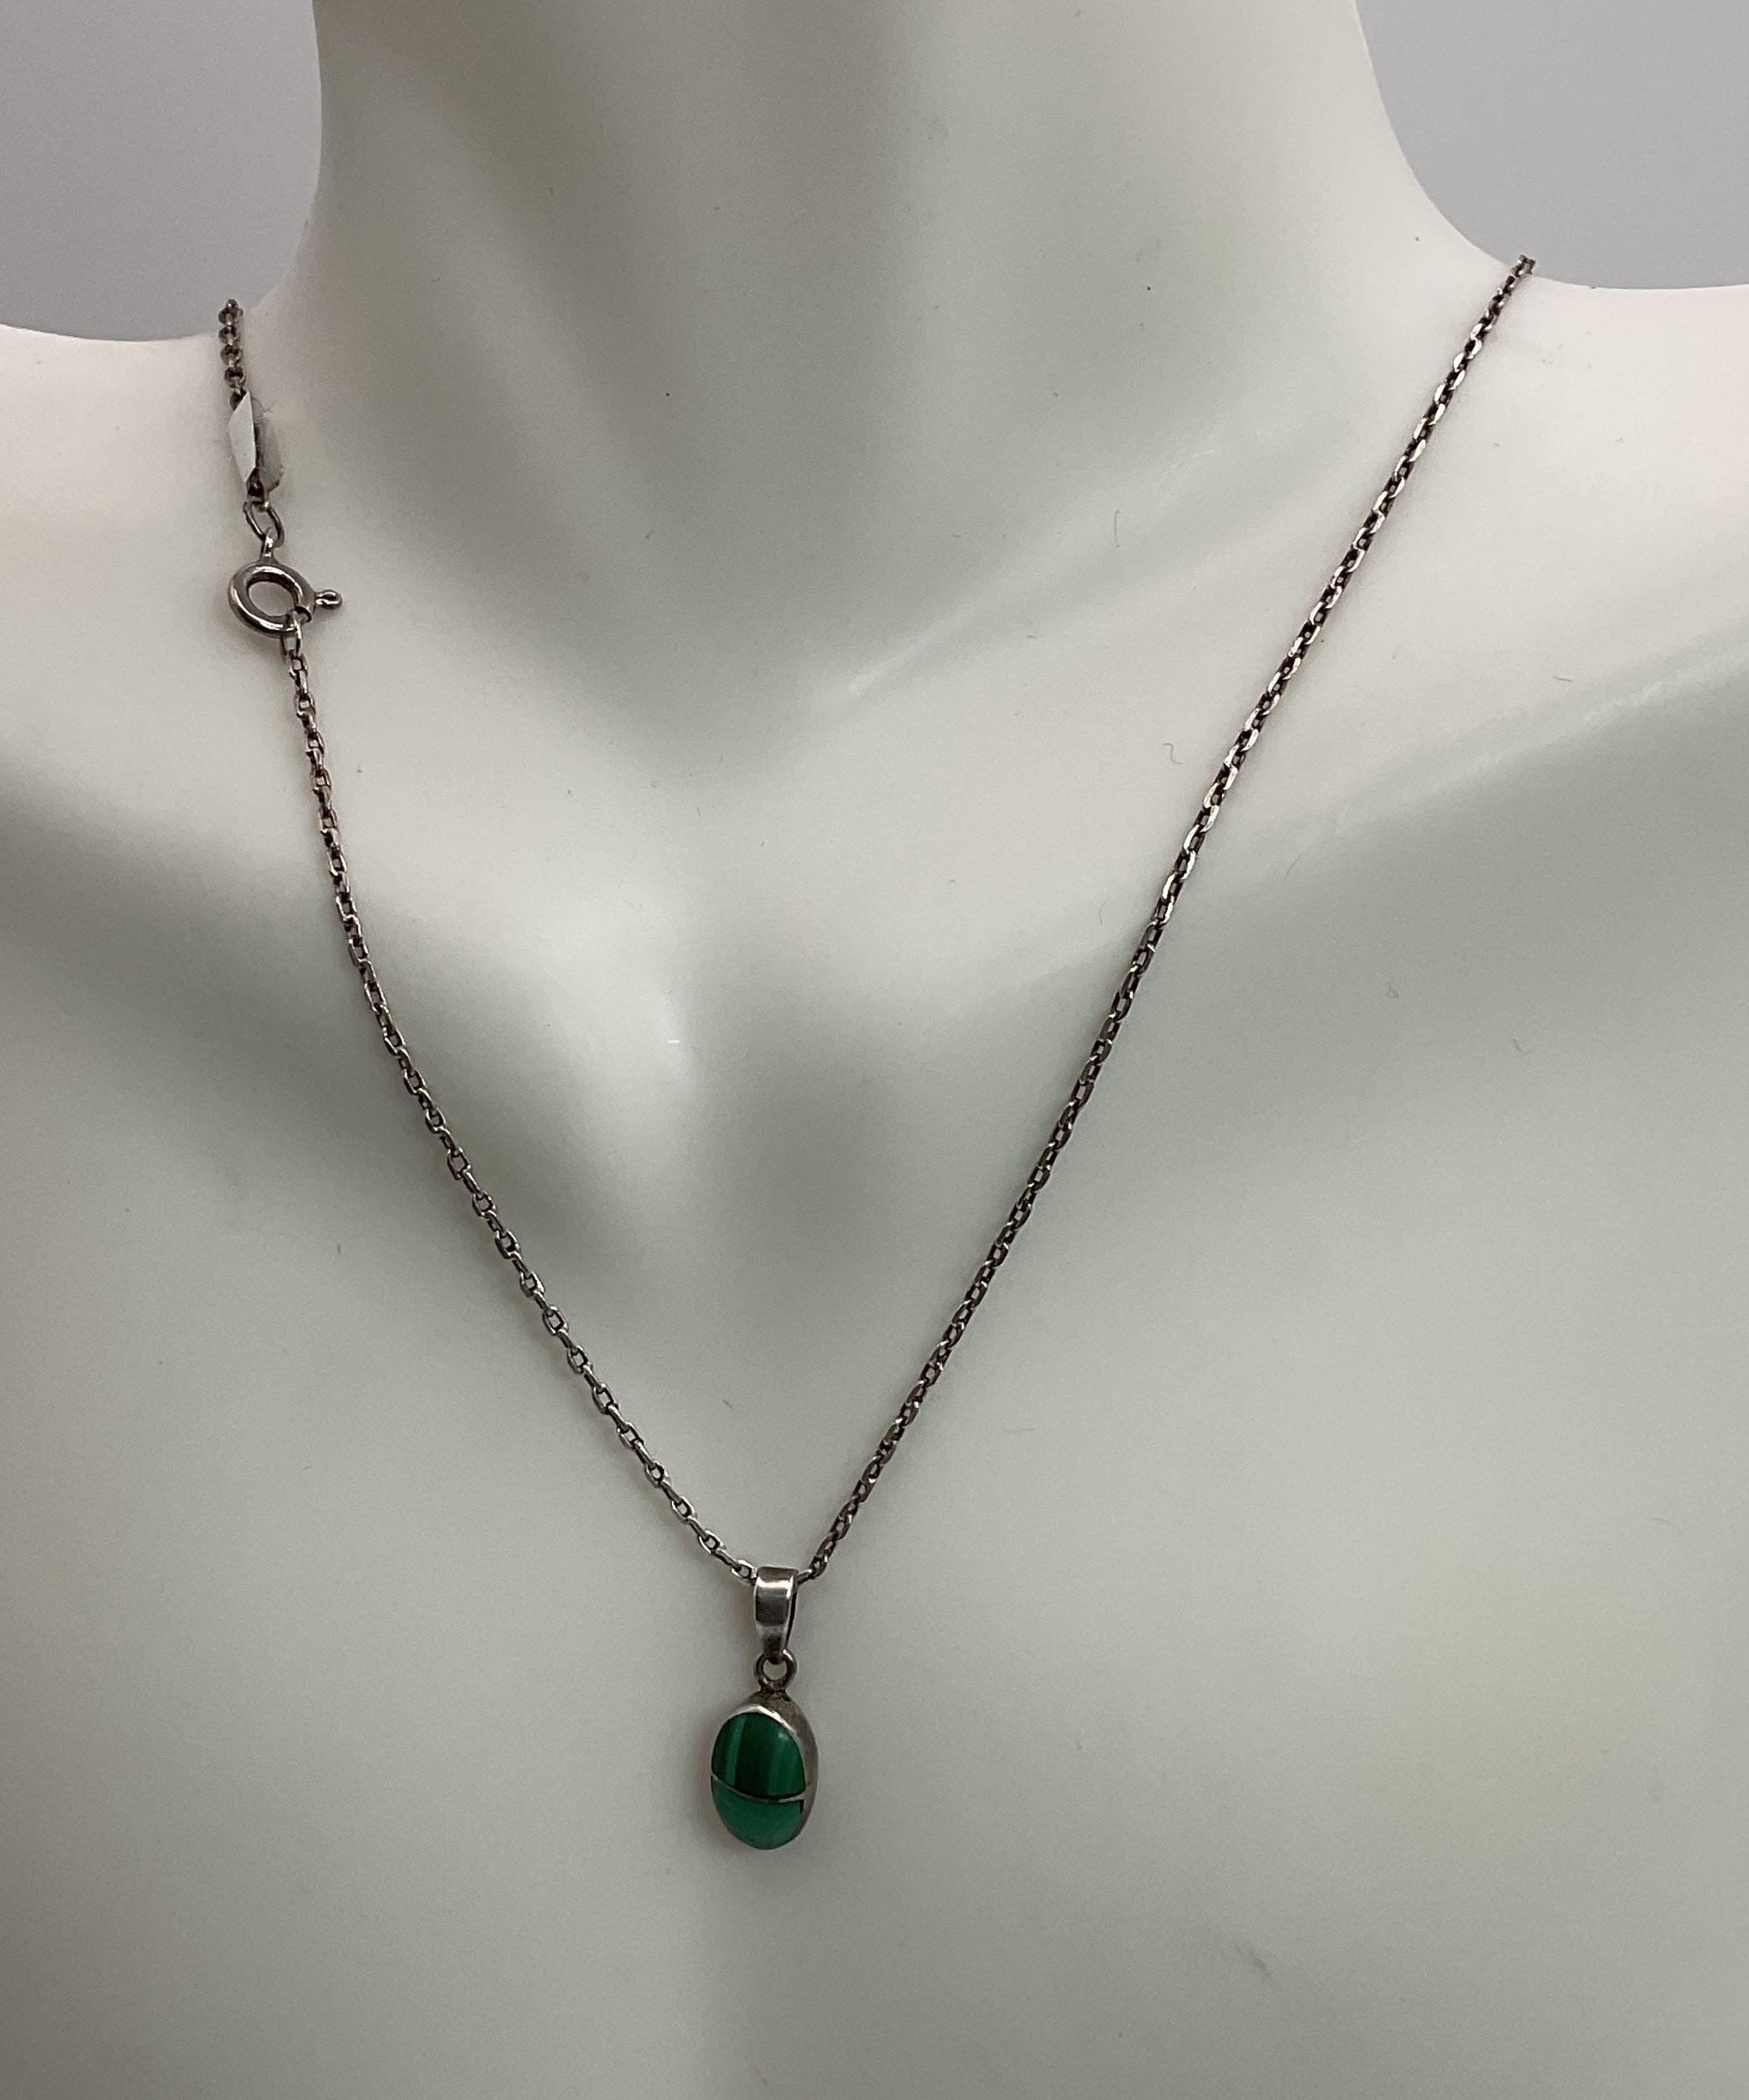 2.2g .925 Sterling Necklace 16"